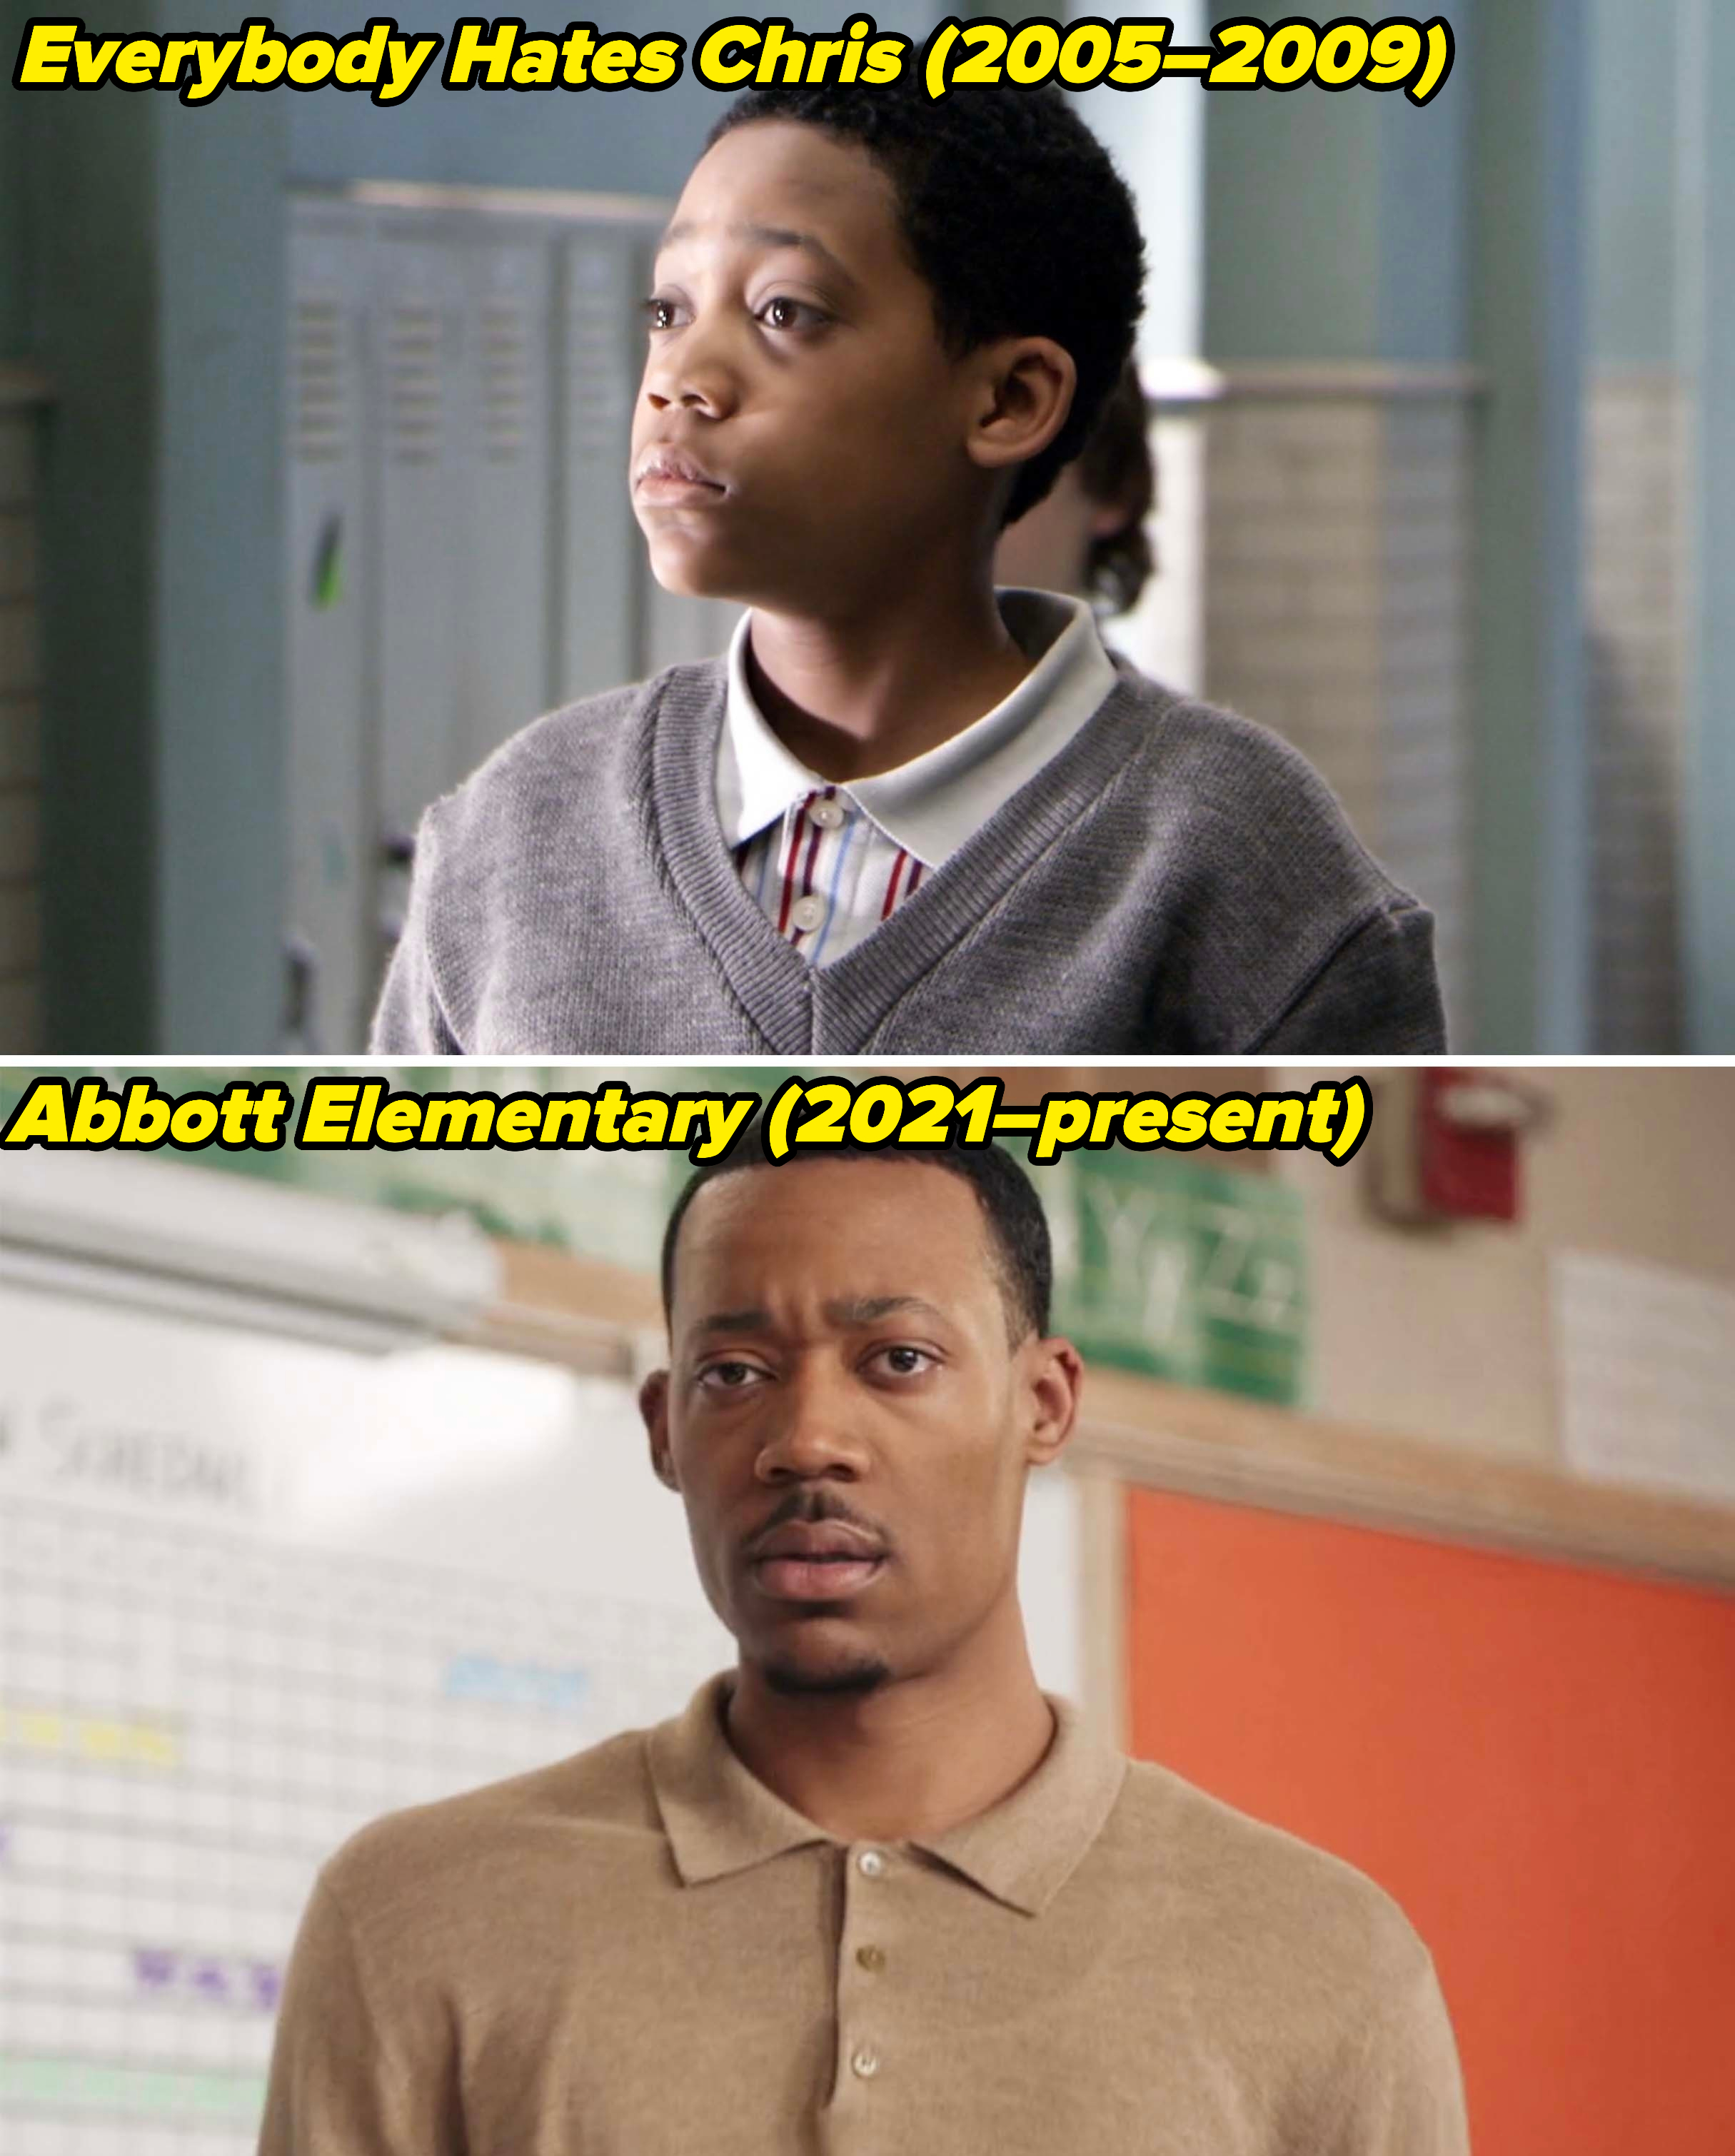 Tyler in Everybody Hates Chris from 2005–2009 and in Abbott Elementary since 2021